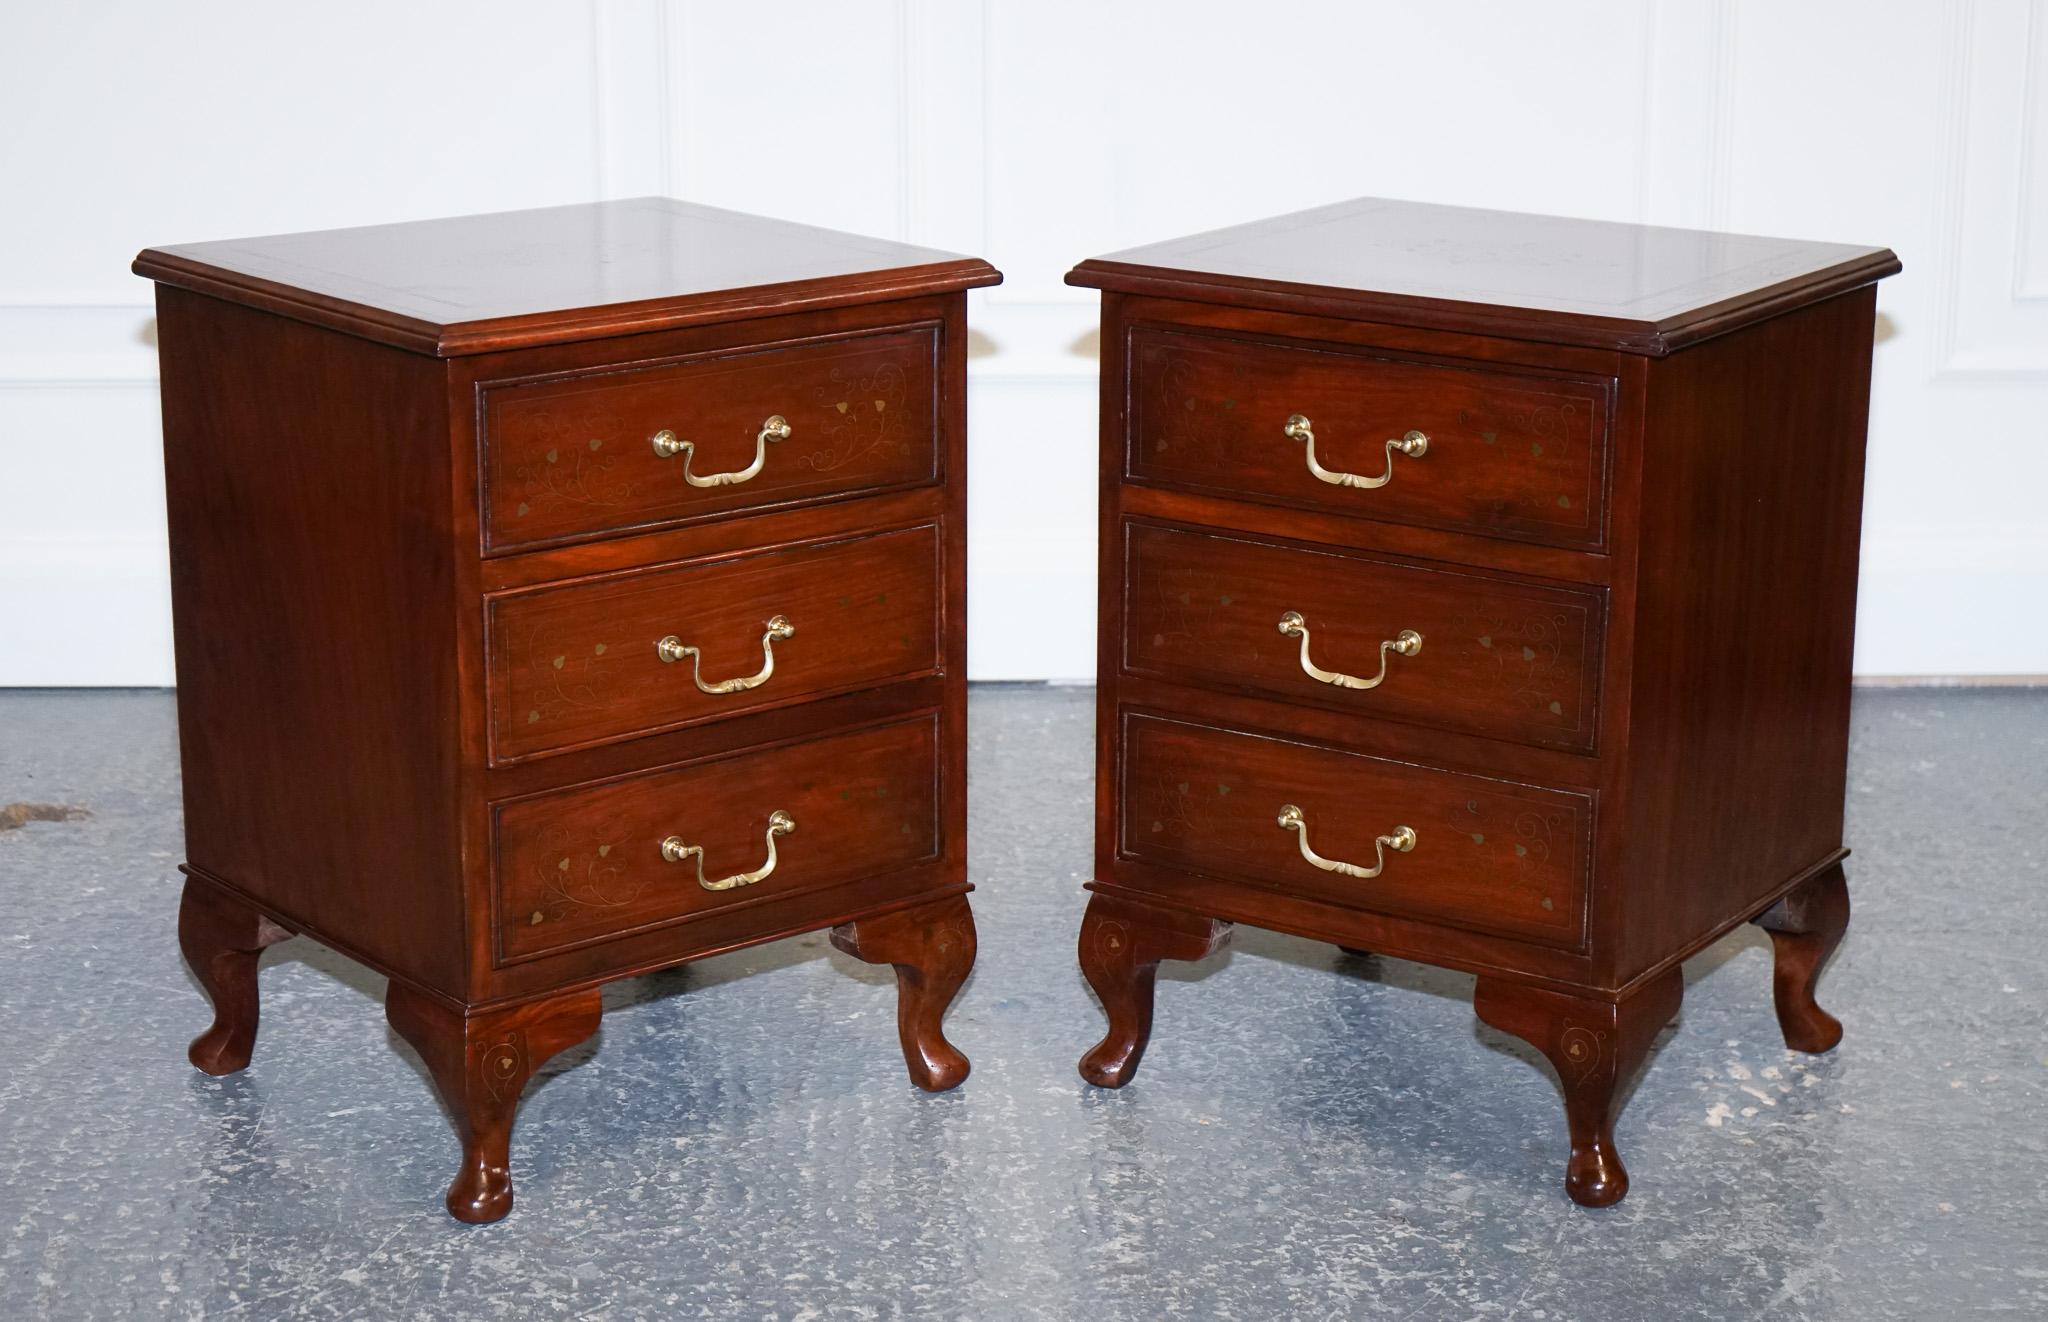 We are delighted to offer for sale this Stunning Pair of Brass Inlaid Anglo Indian Nightstands.

These Anglo-Indian bedside tables are a truly stunning addition to any bedroom. Handcrafted from solid brass, the tables feature intricate geometric